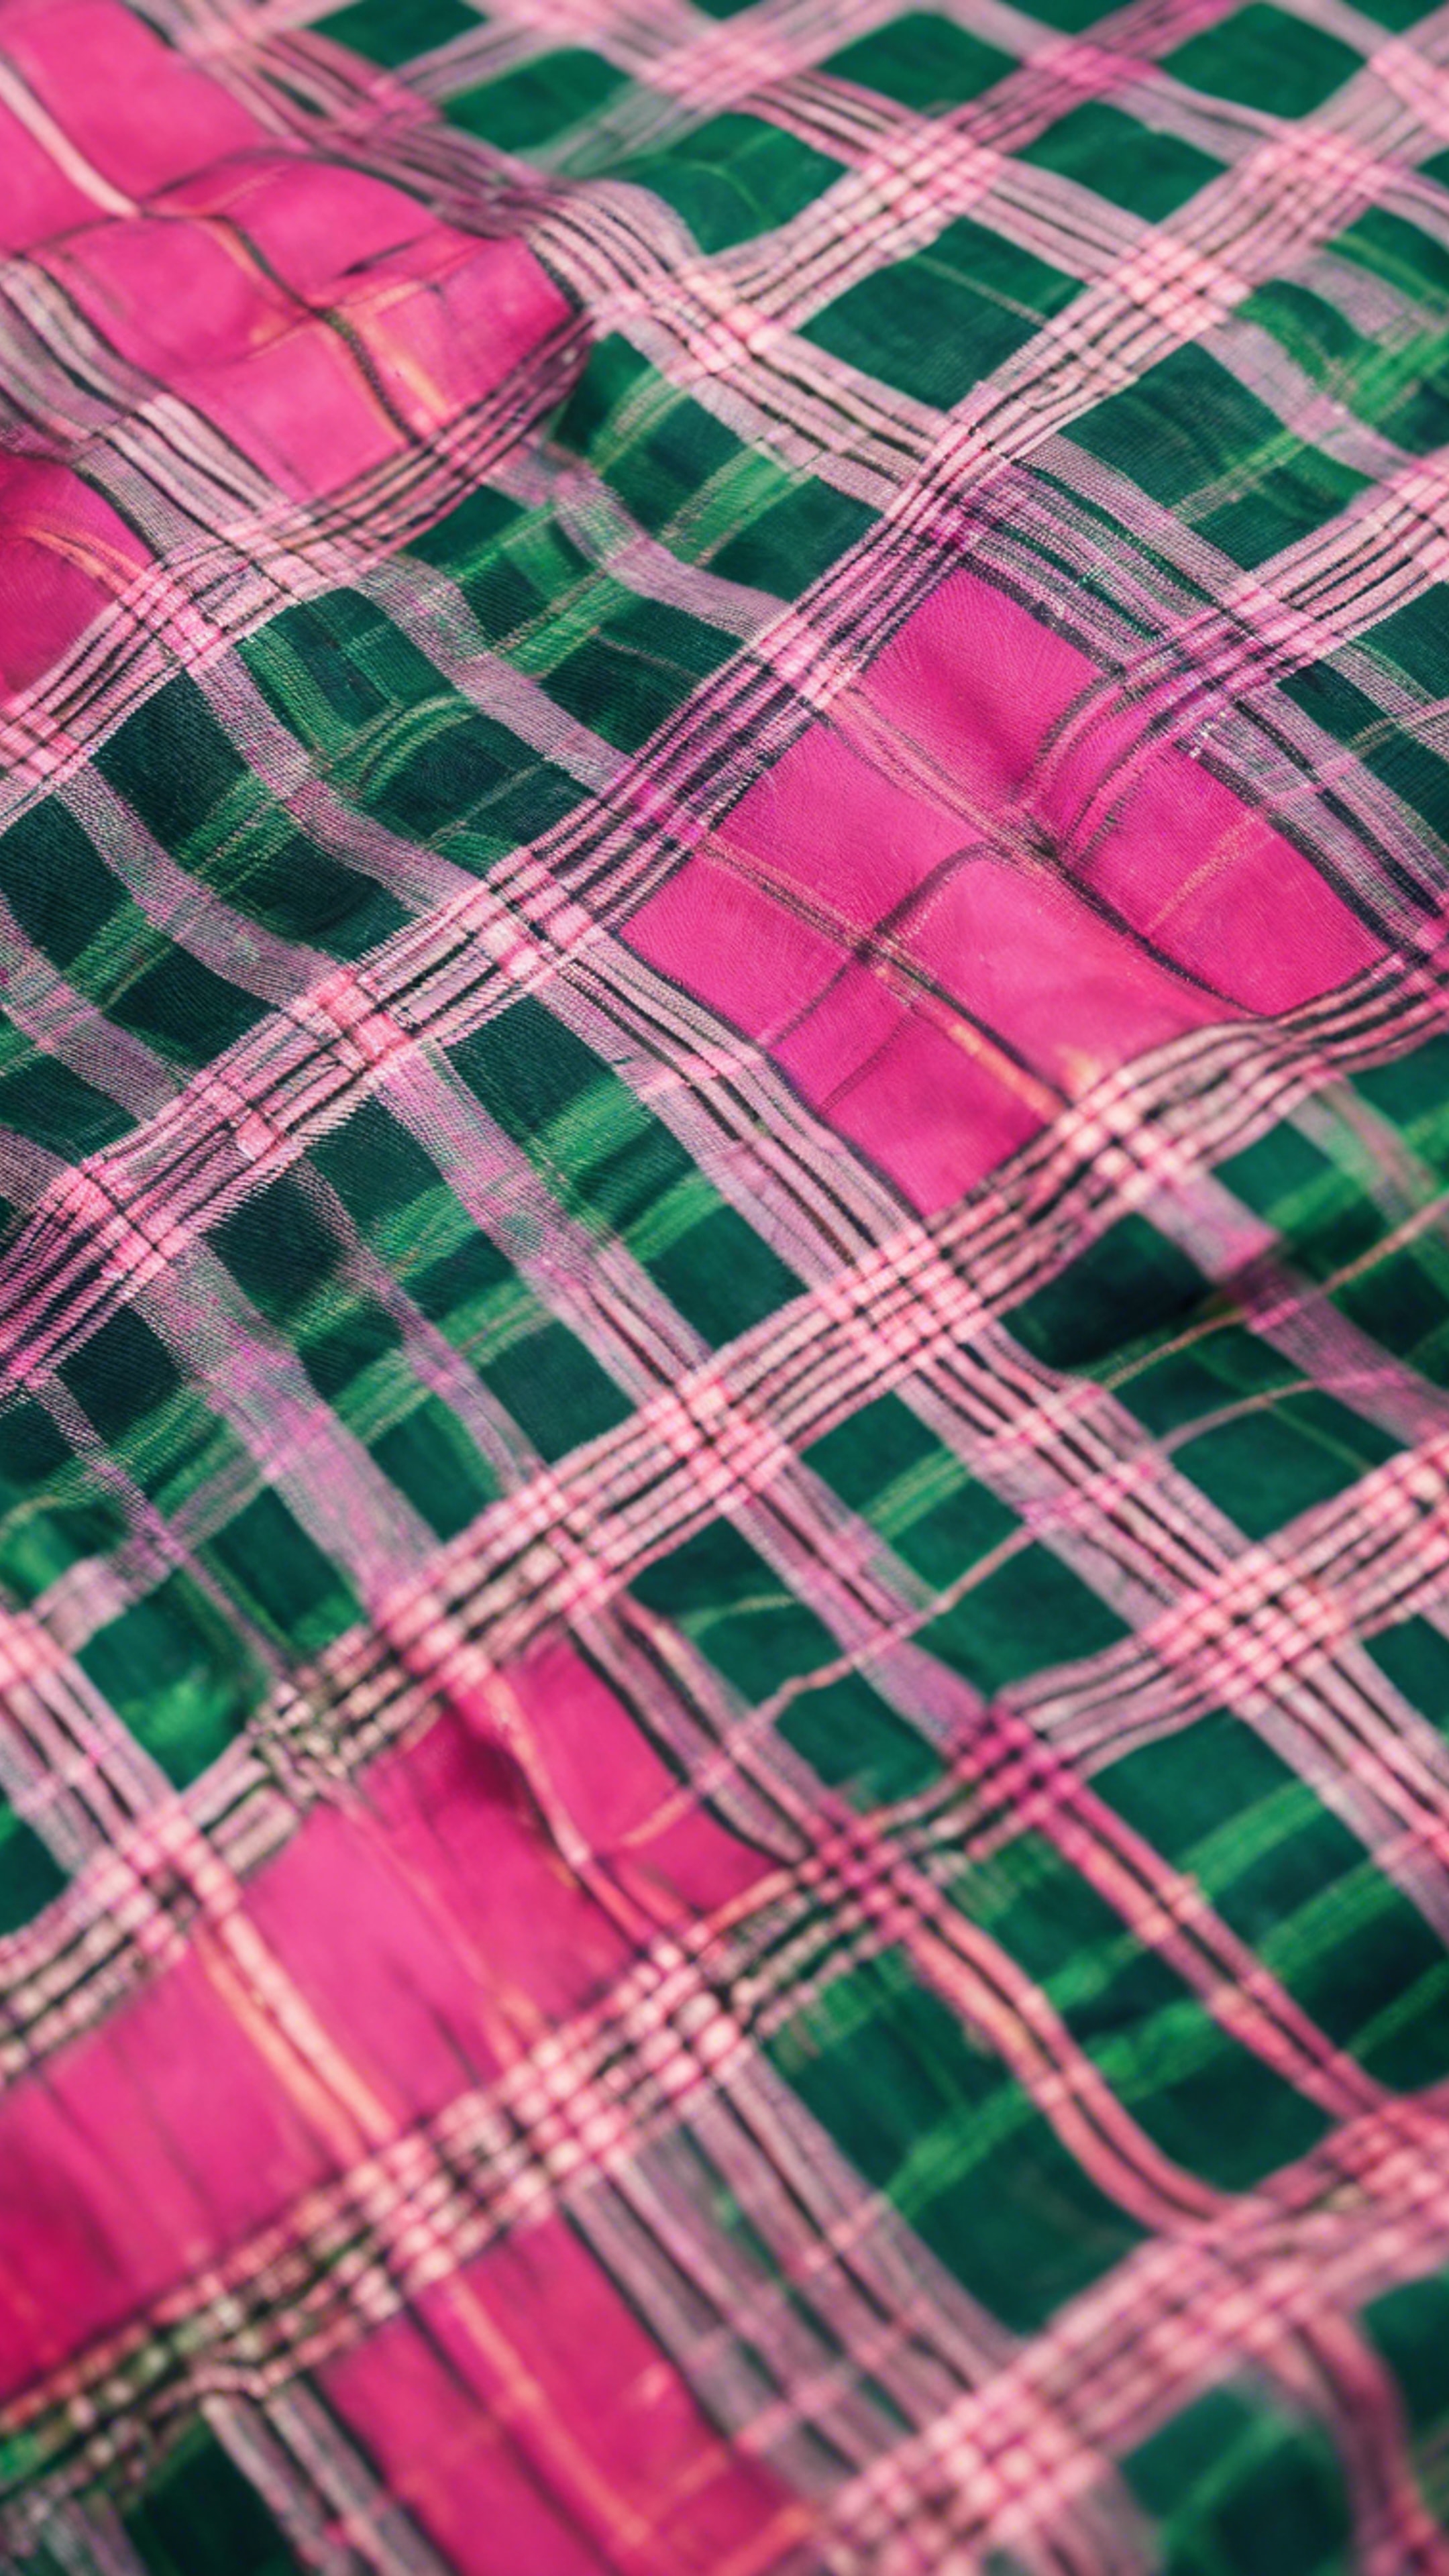 A vibrant green and pink tartan pattern covering a preppy summer coat. Tapet[87107d8556aa4441ace0]